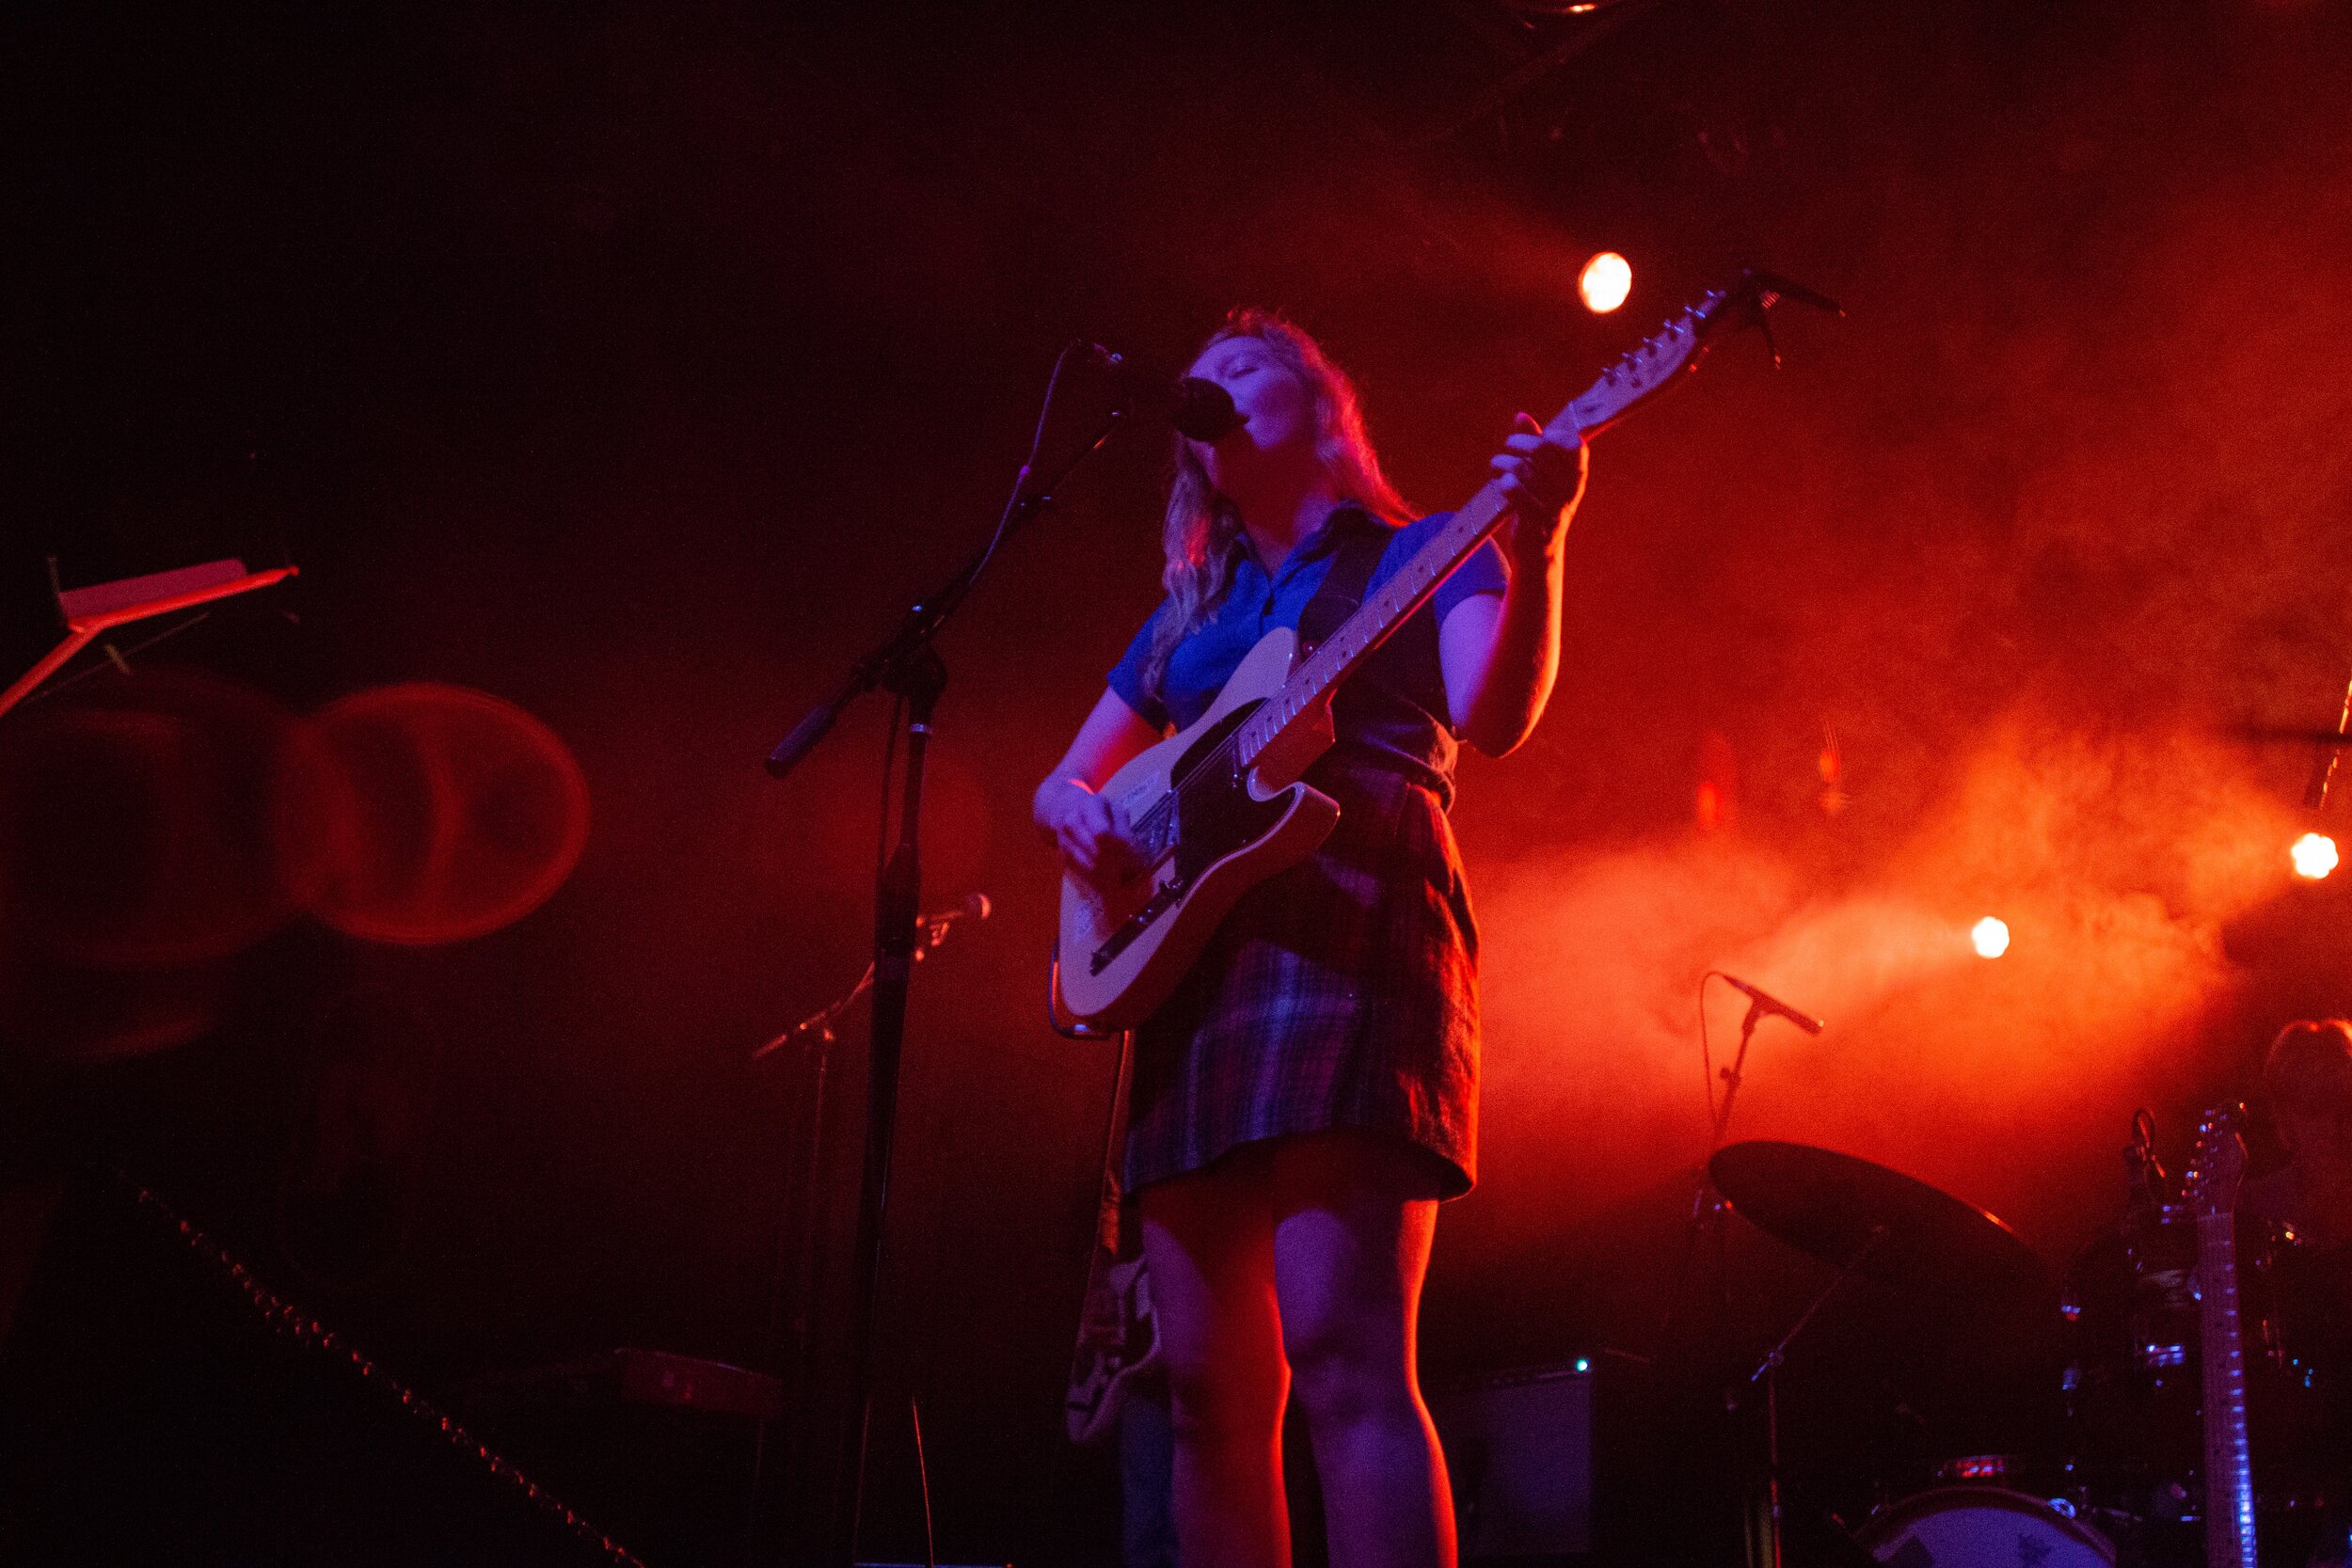  Austrailian singer-songwriter Julia Jacklin performs at the Parish during ACL Late Night on October 12, 2019. Jacklin’s released her second full-length album “Crushing” on February 22, 2019. 